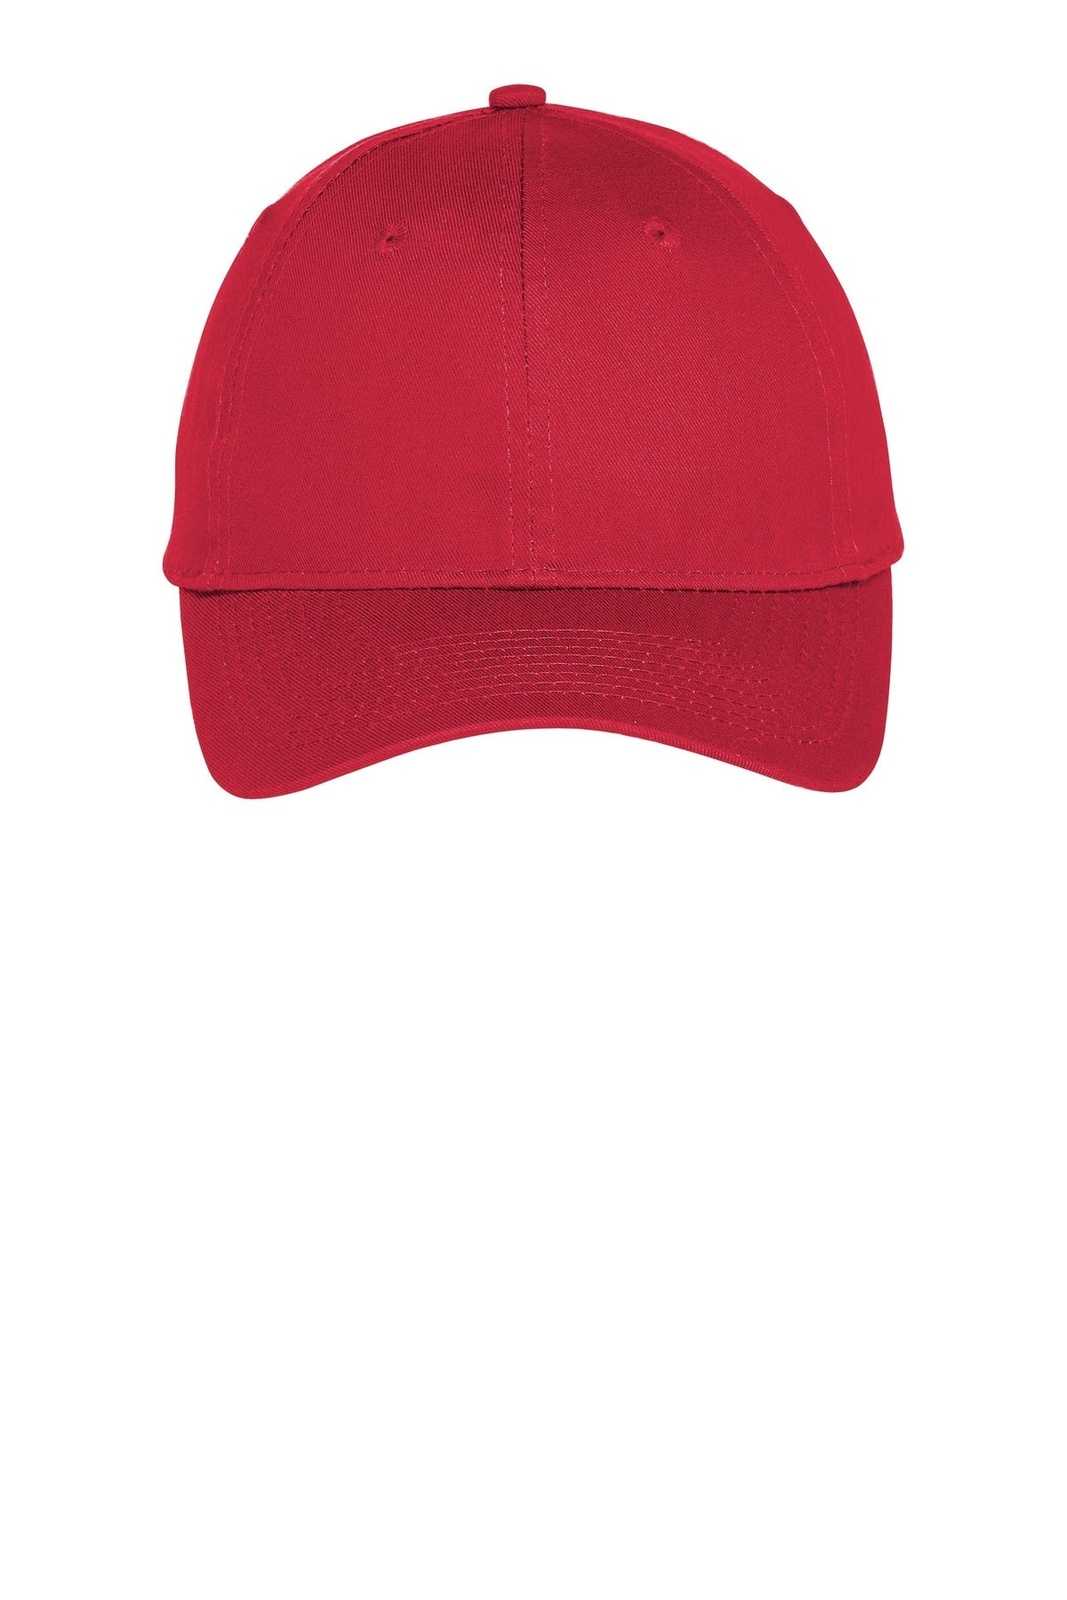 Port &amp; Company C914 Six-Panel Unstructured Twill Cap - True Red - HIT a Double - 1